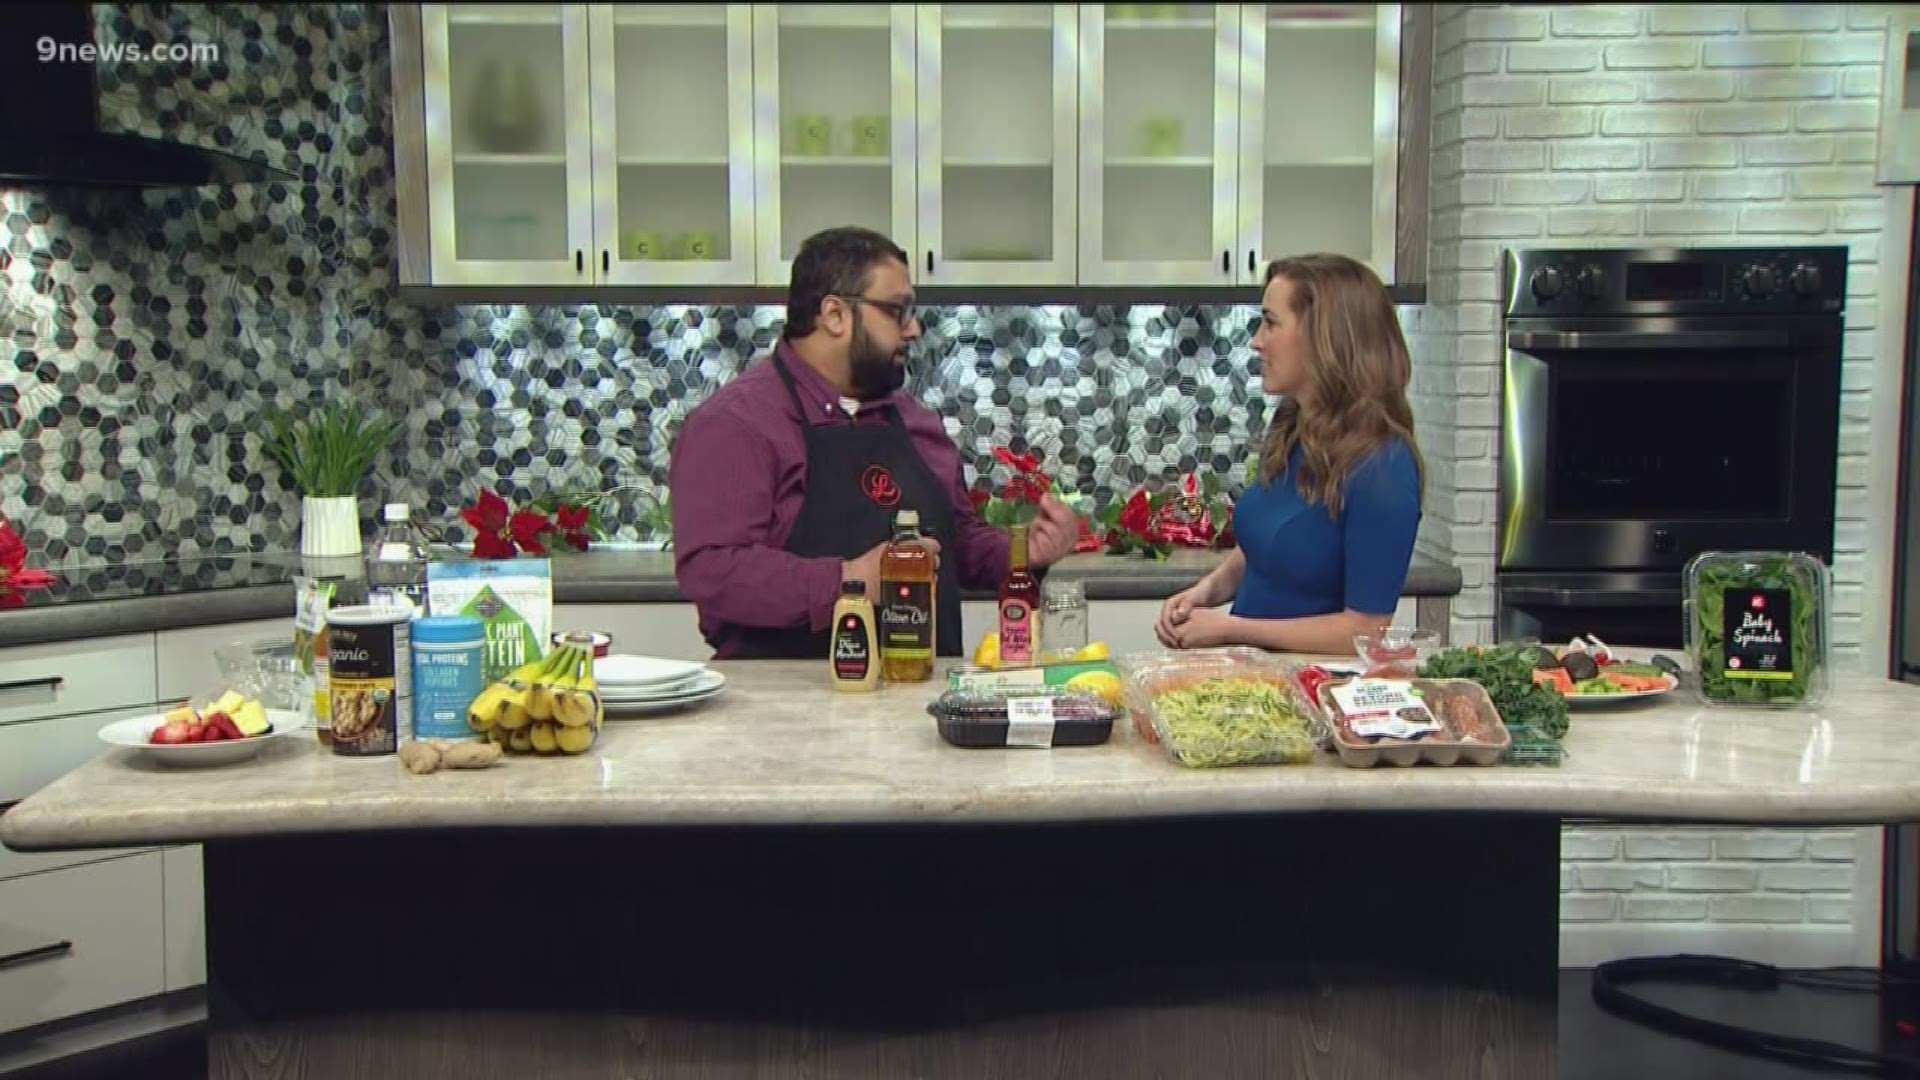 The culinary manager for Lucky's Market in Denver joins us to share ideas for healthy snacks, salad dressing and more.